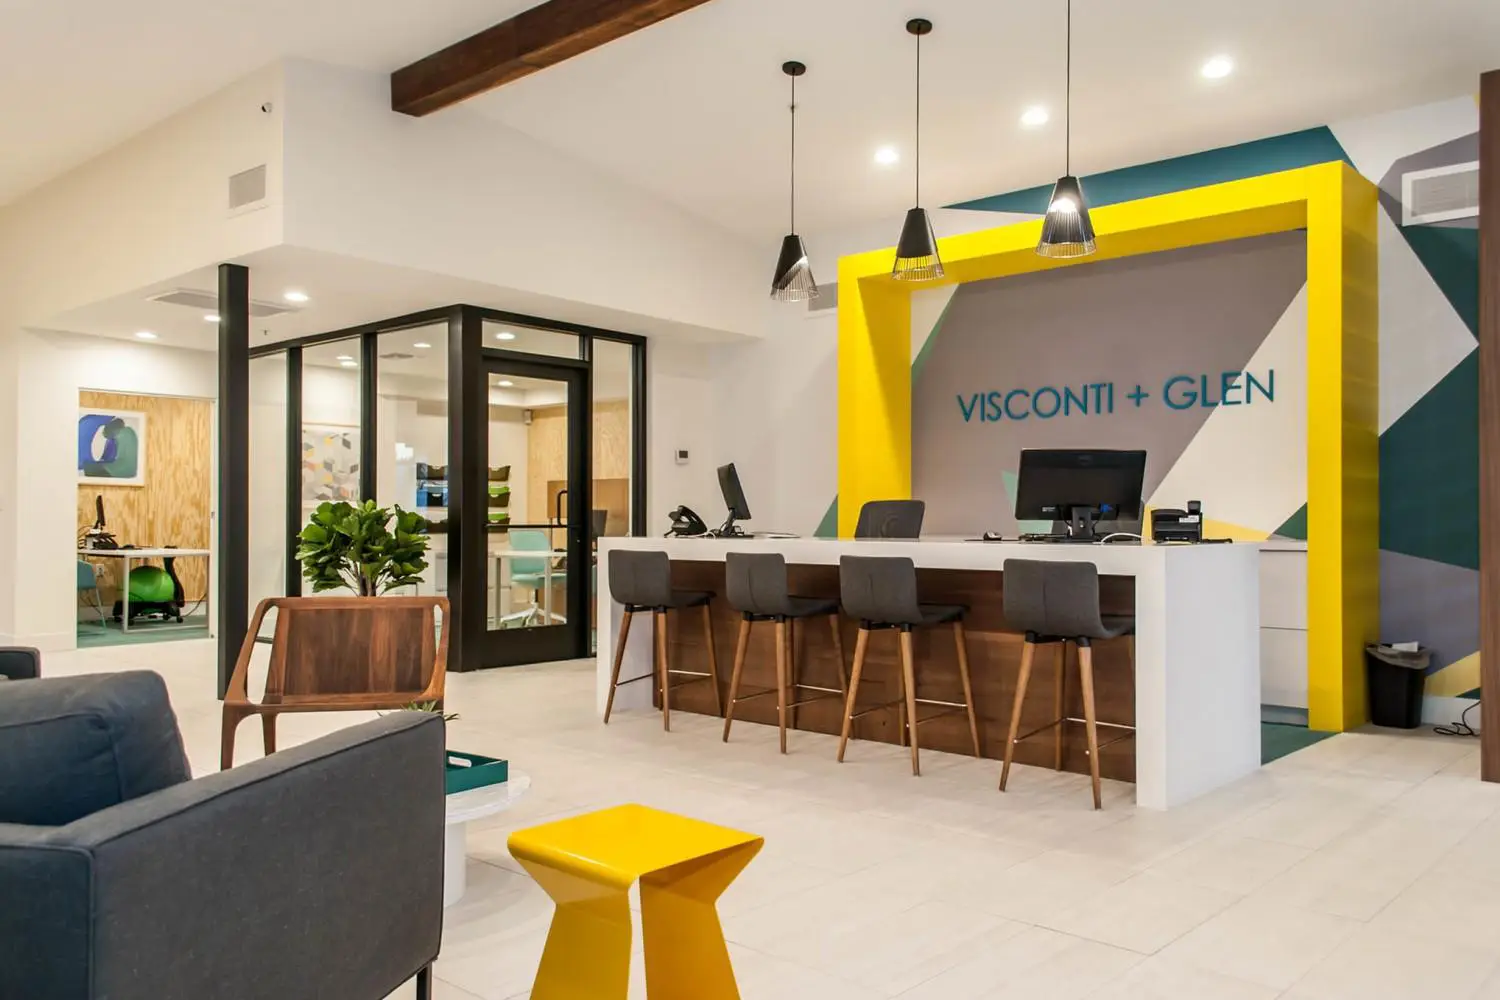 Visconti and Glen Apartments leasing office with barstool seating, lounge areas, and private offices